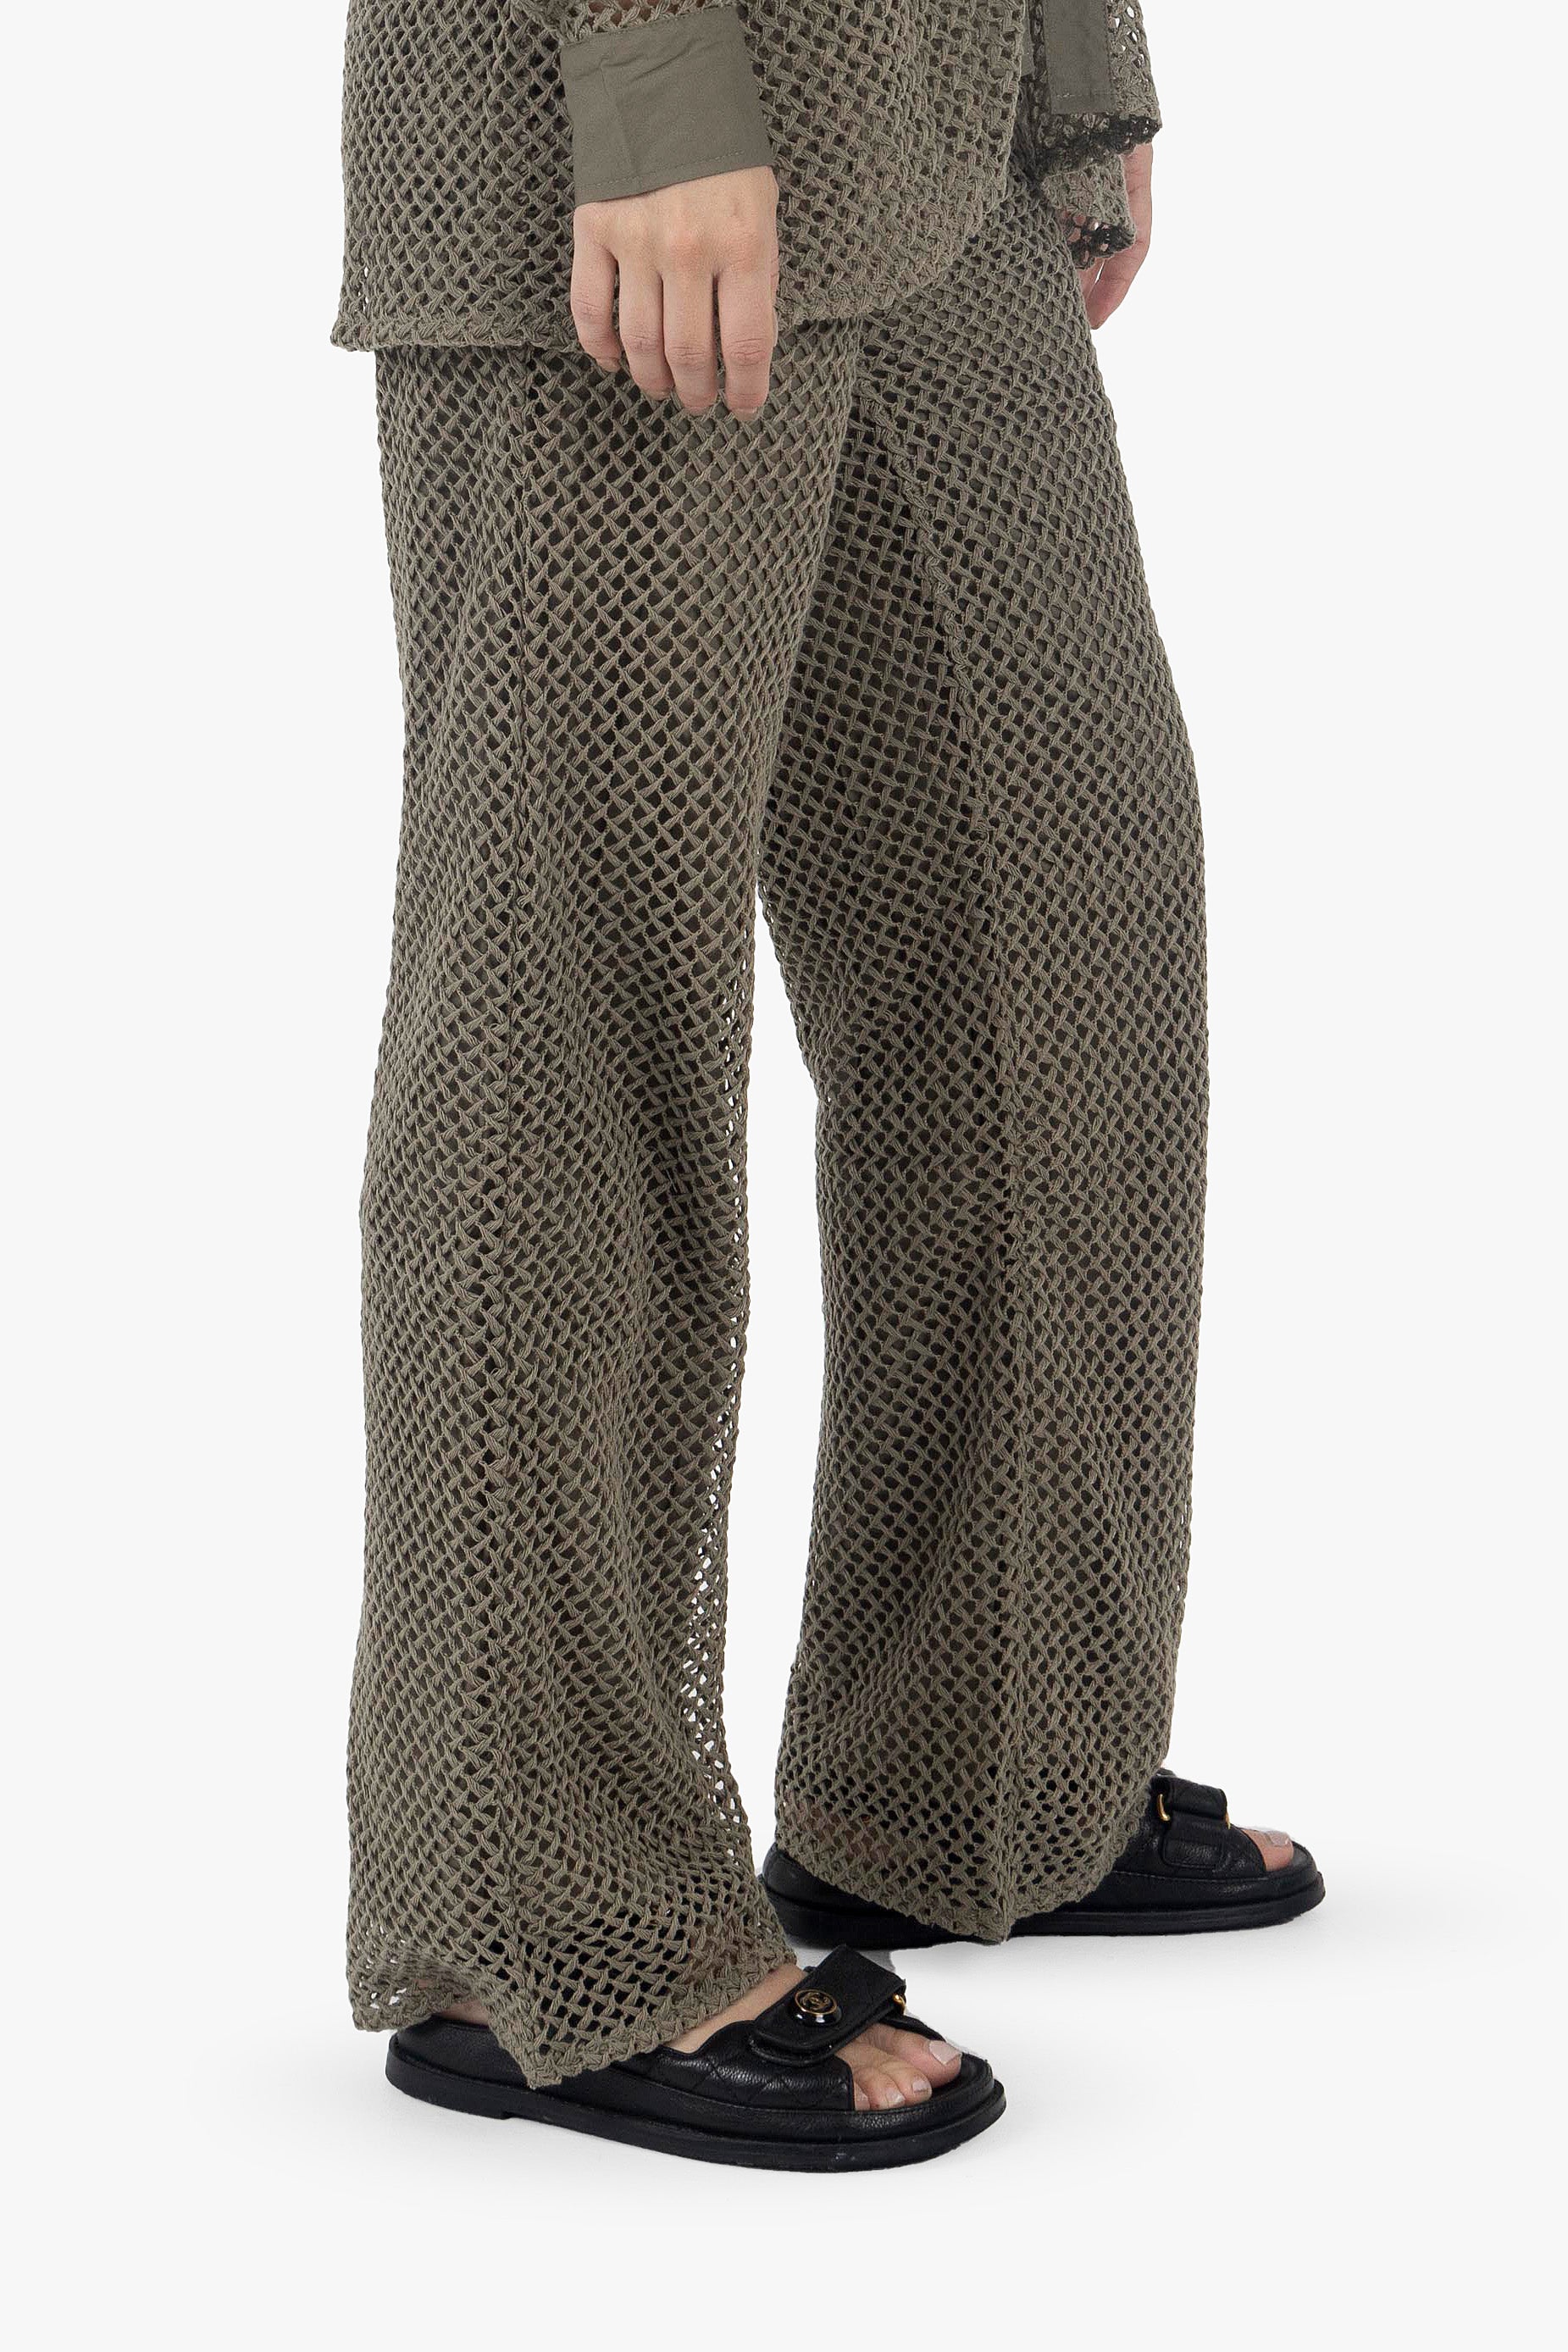 OLIVE KNIT TROUSERS